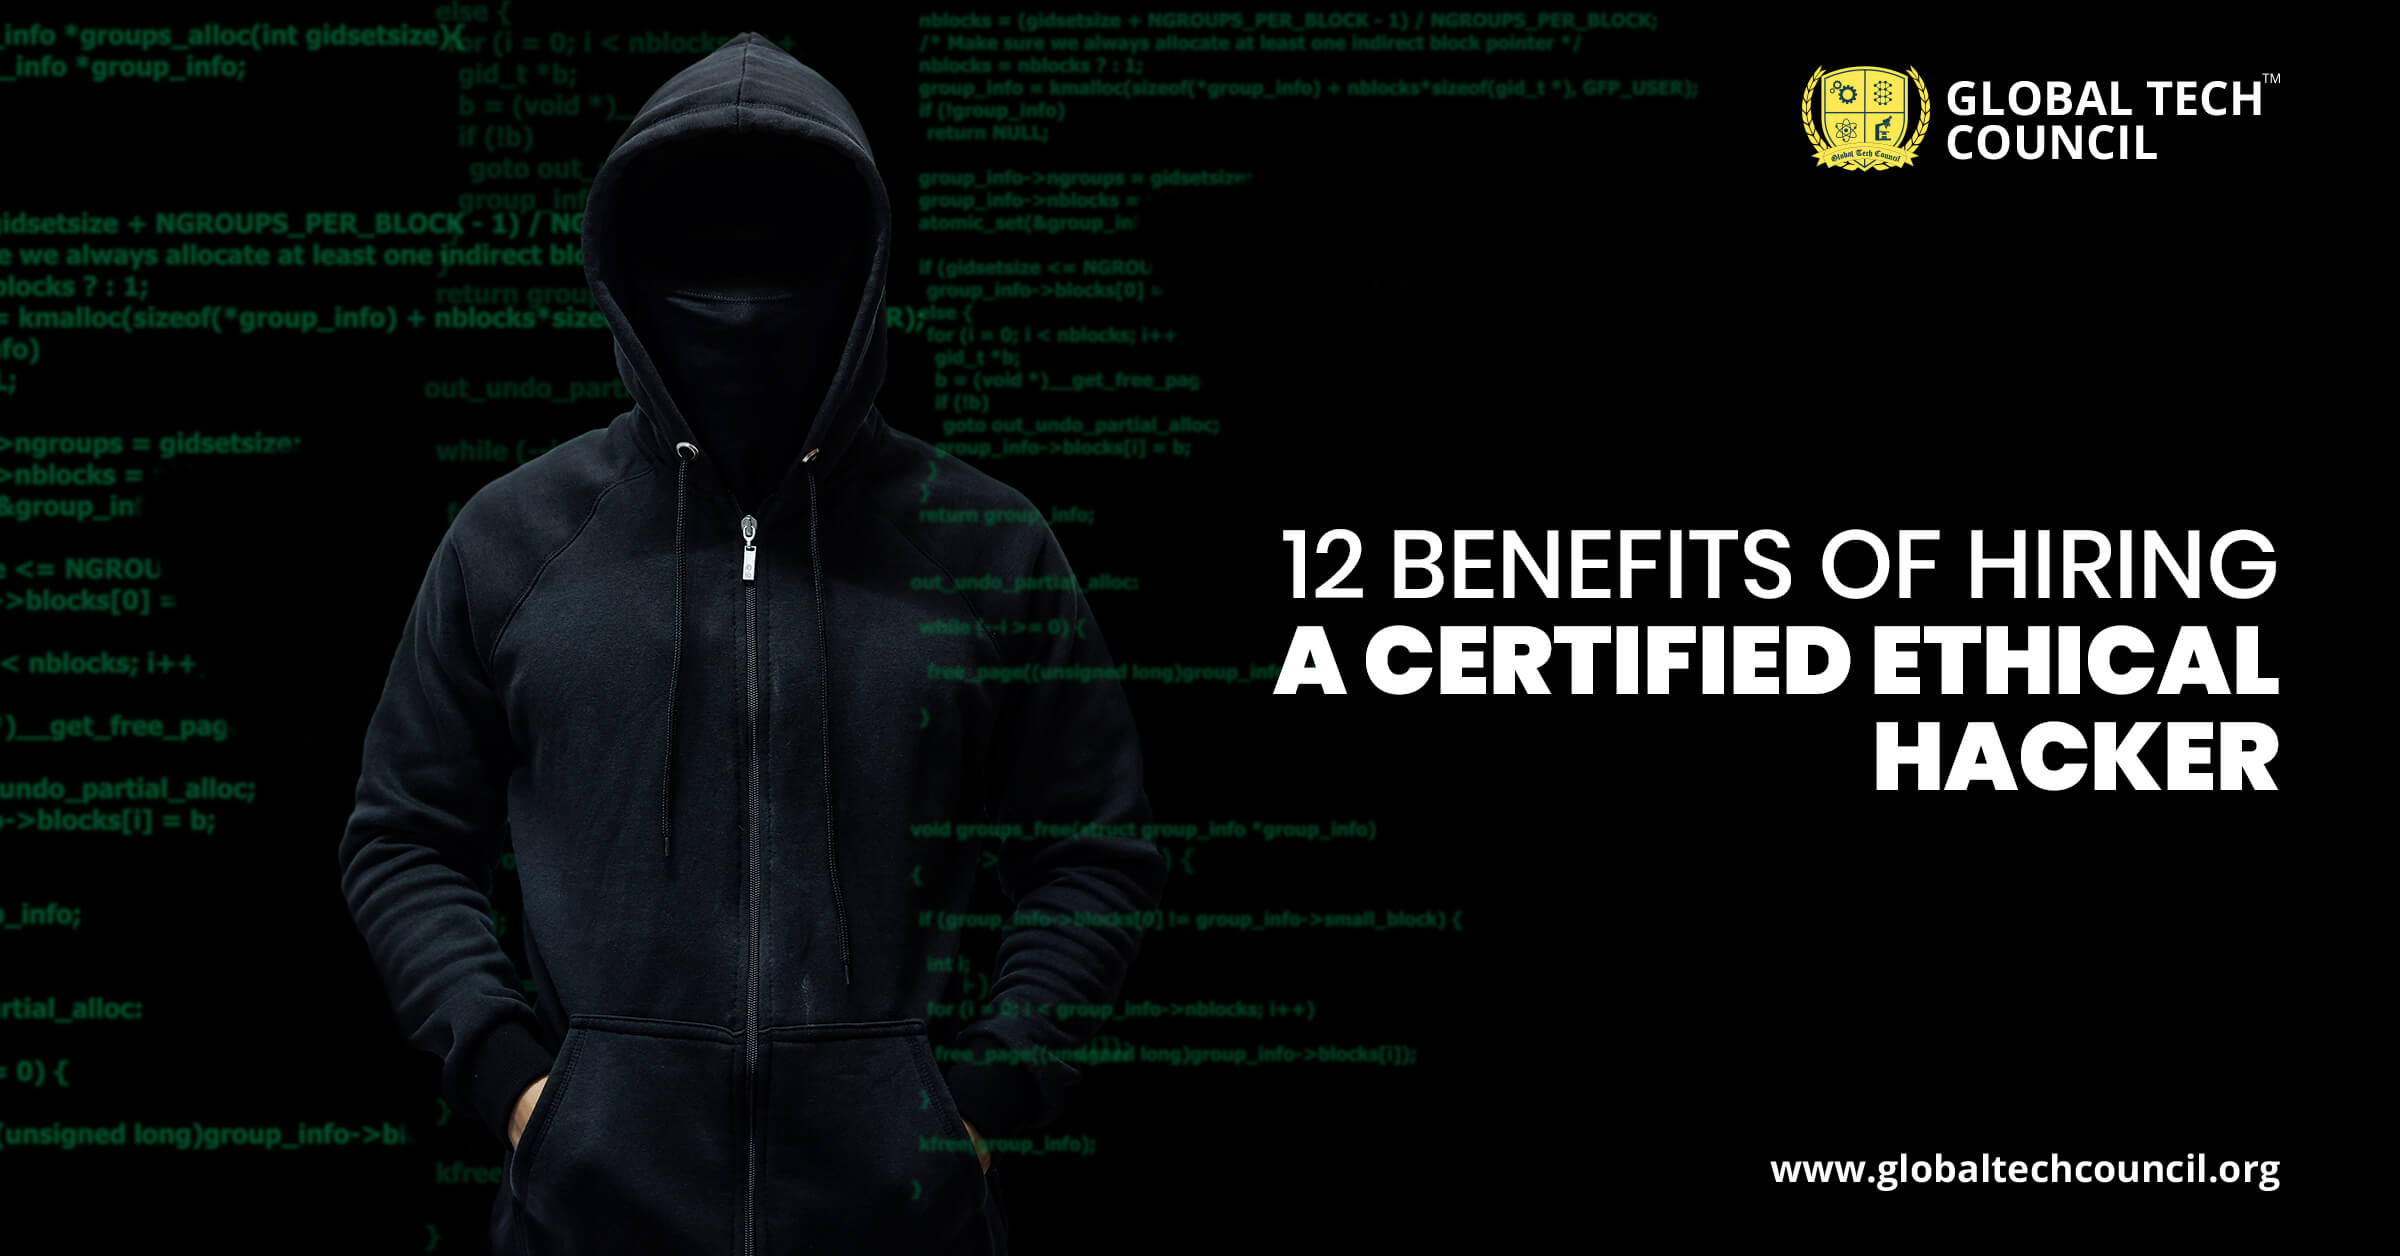 12 Benefits of Hiring a Certified Ethical Hacker